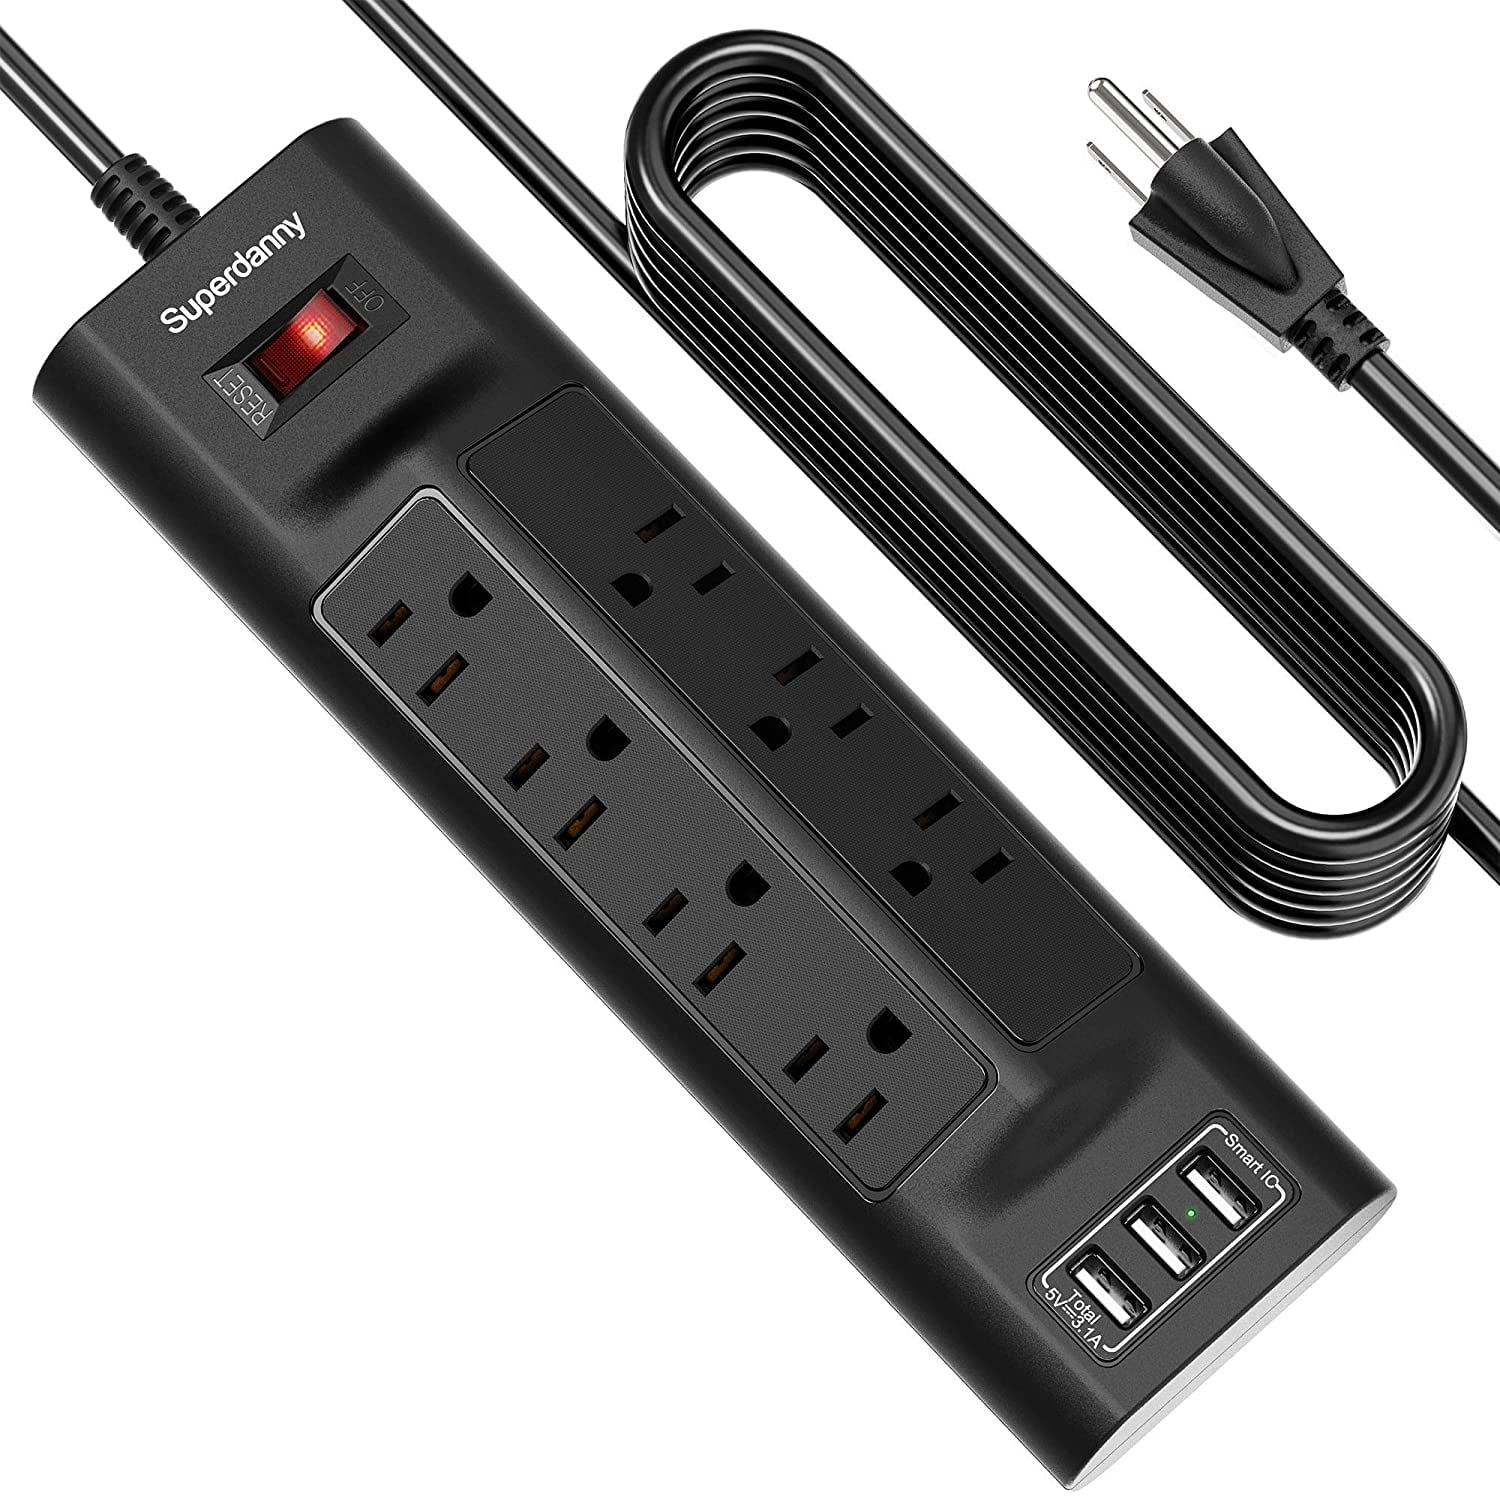 SUPERDANNY USB Surge Protector Power Strip Mountable Multiple Protection 5Outlet 